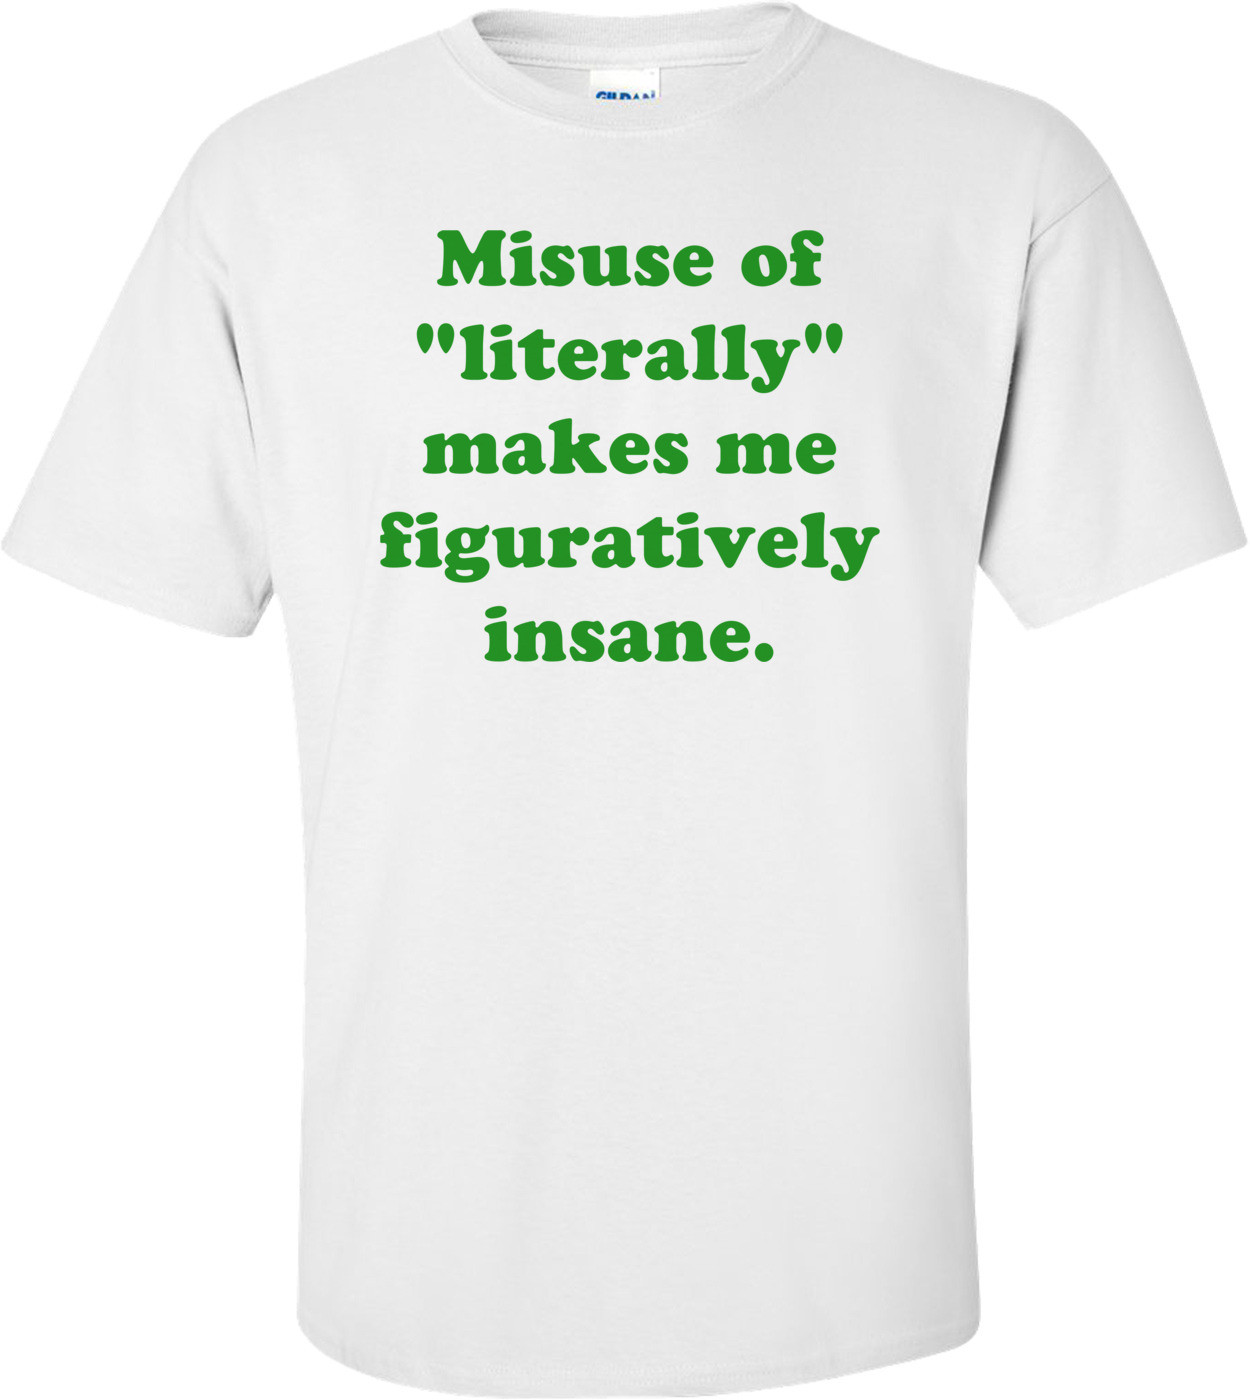 Misuse Of "Literally" Makes Me Figuratively Insane.